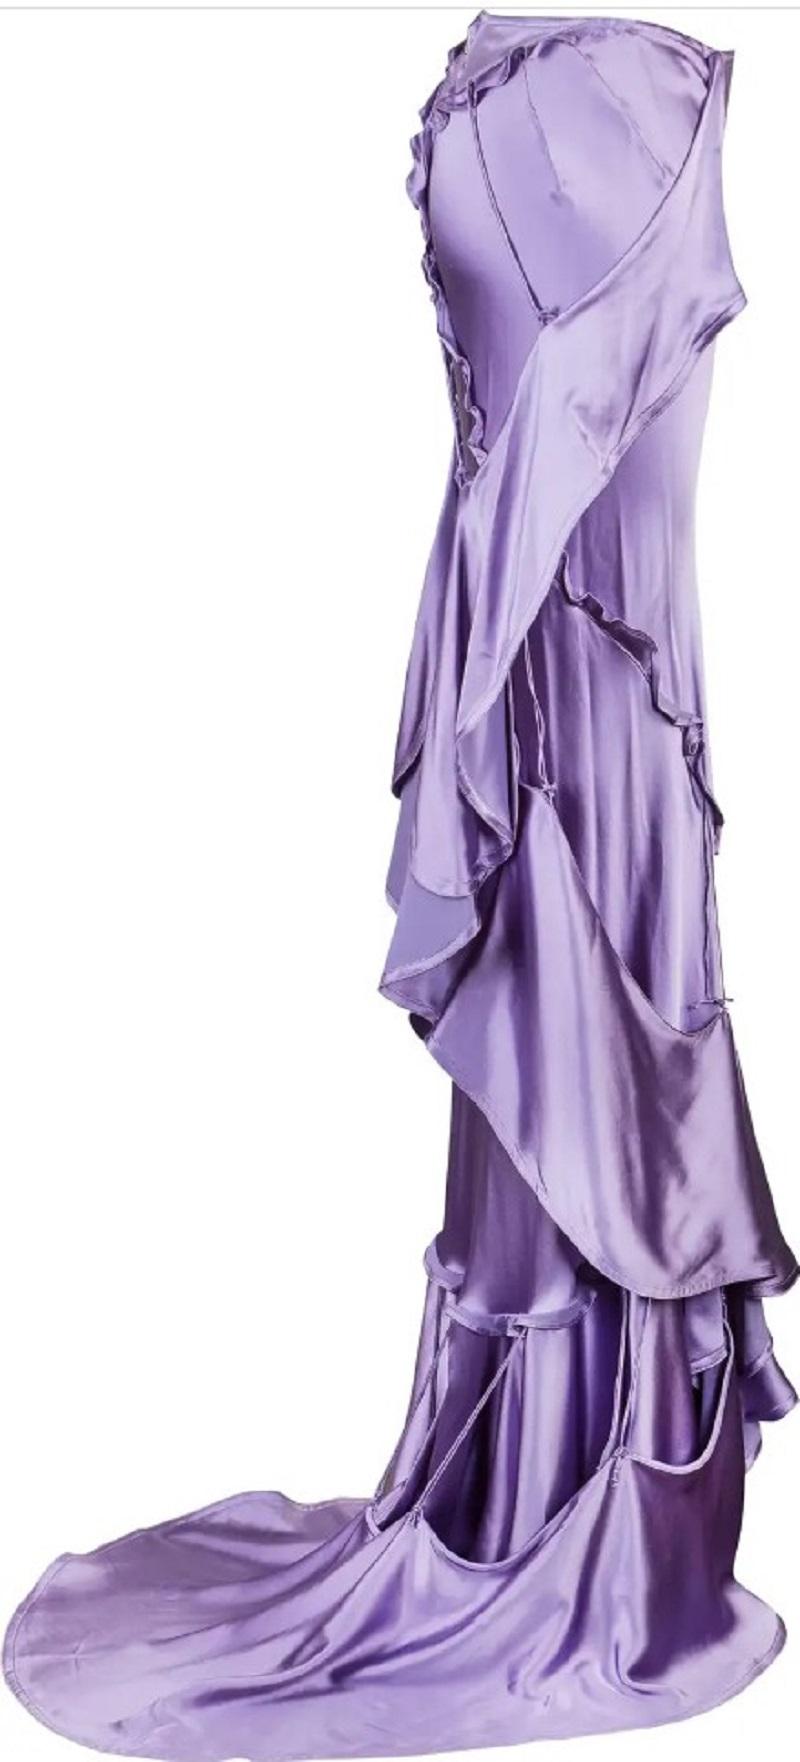 New Tom Ford for Yves Saint Laurent Rive Gauche Silk Maxi Skirt
F/W 2003 Runway Collection
French size 36 - US 4
Artfully constructed from ruffles which are connected by ties to the skirt.
Lavender color., 100% silk. High - Low style. Zipper